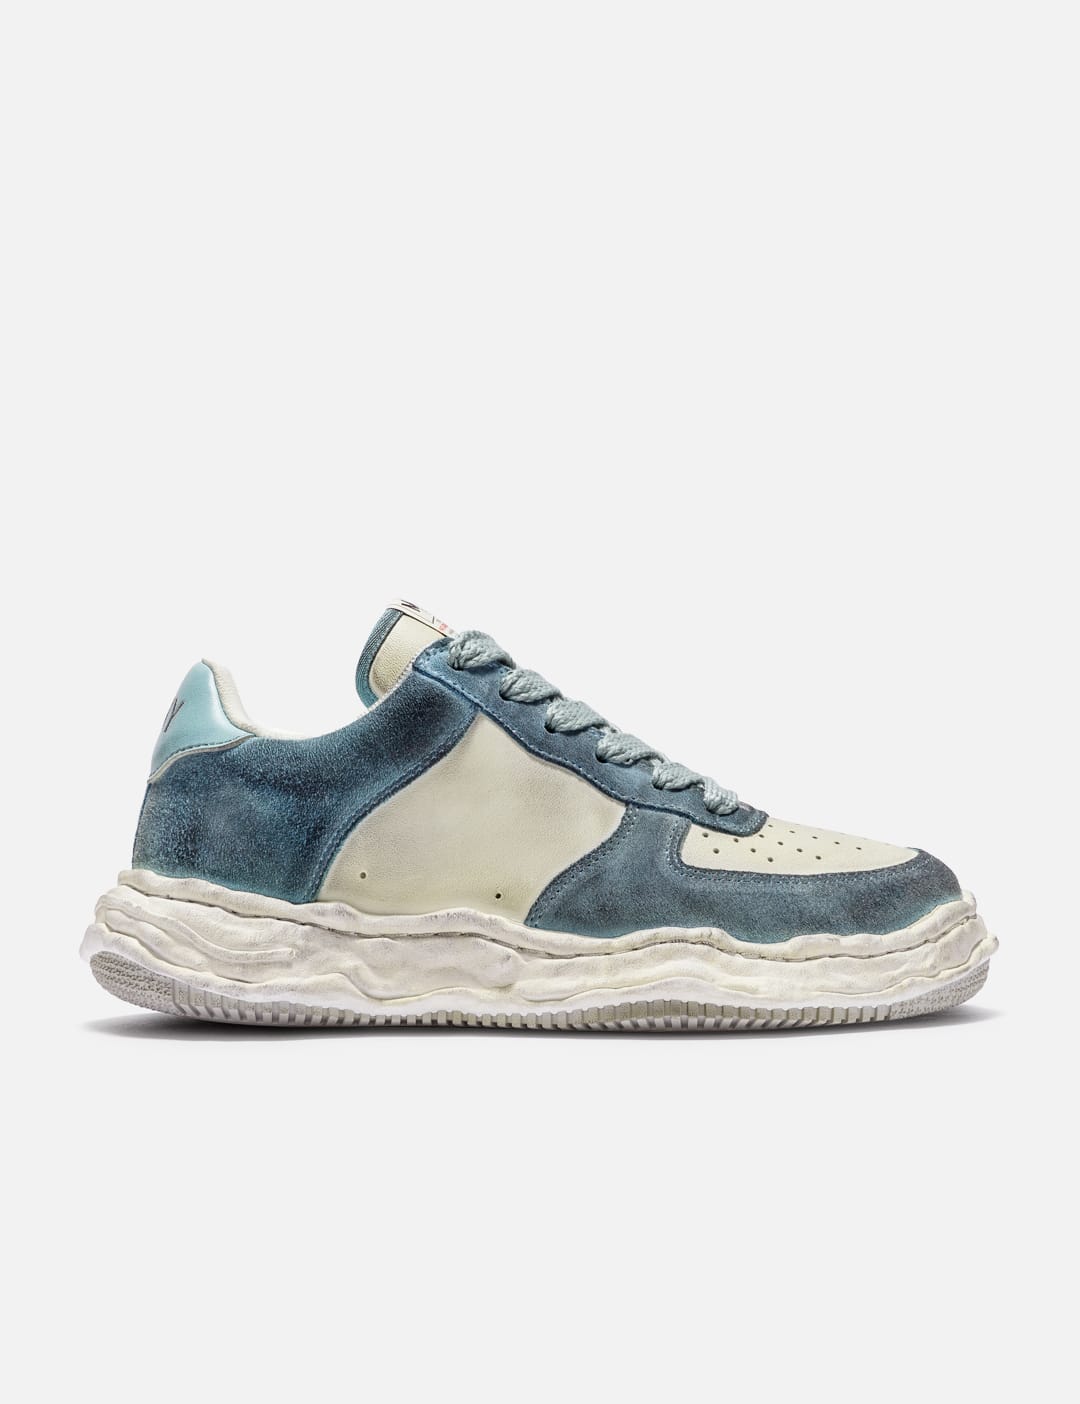 Maison Mihara Yasuhiro - Wayne Low Top Sneakers | HBX - Globally Curated  Fashion and Lifestyle by Hypebeast